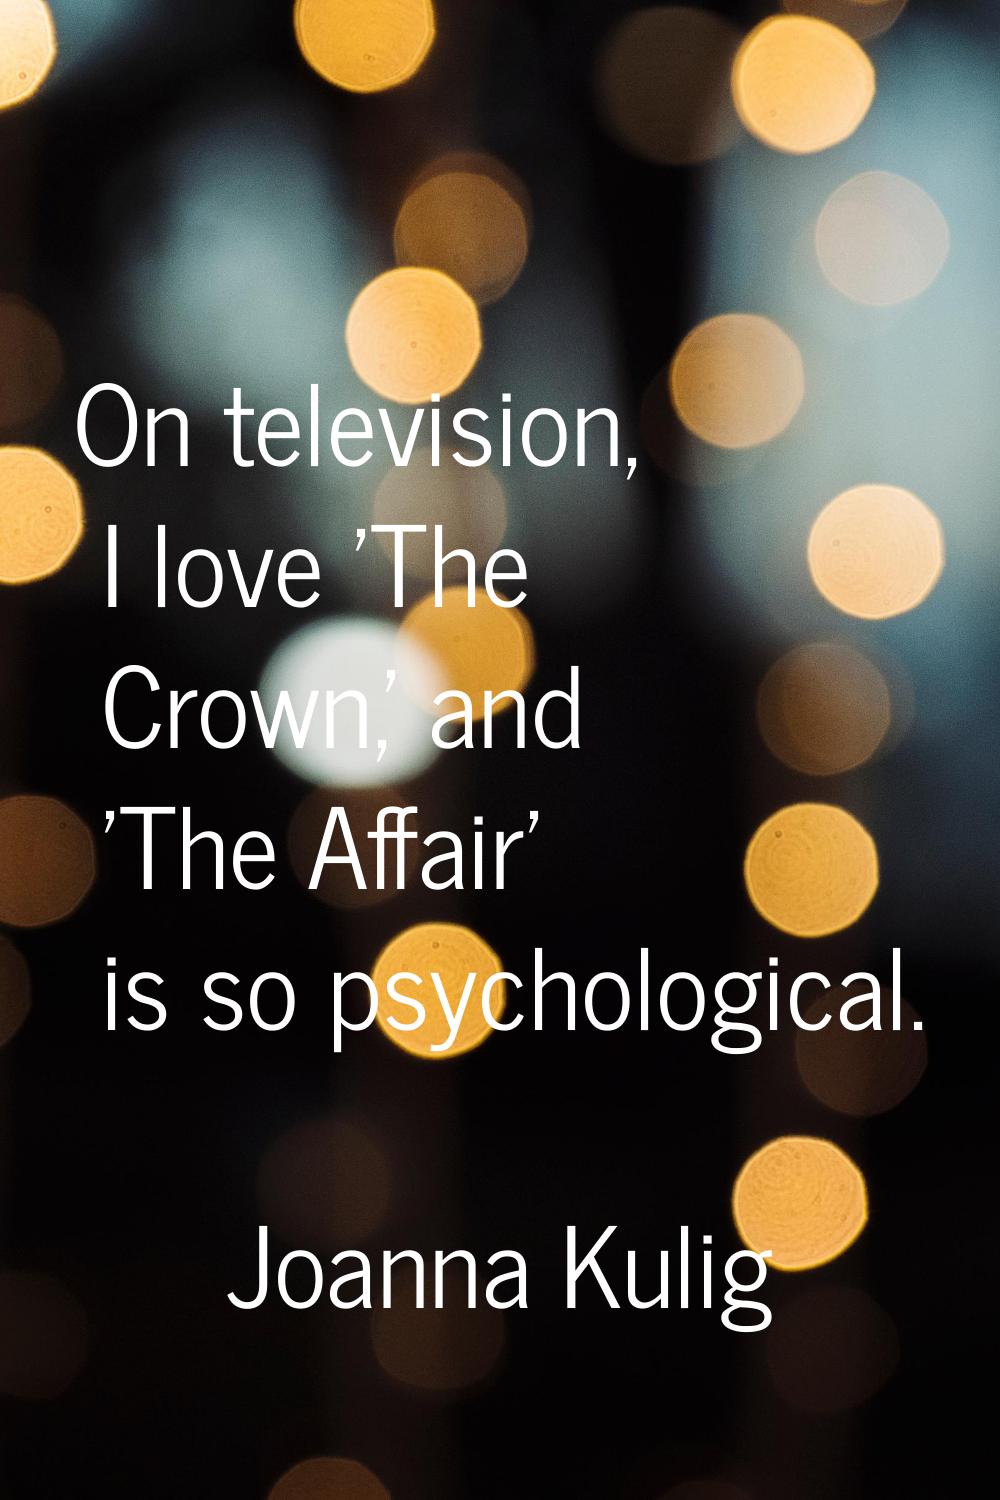 On television, I love 'The Crown,' and 'The Affair' is so psychological.